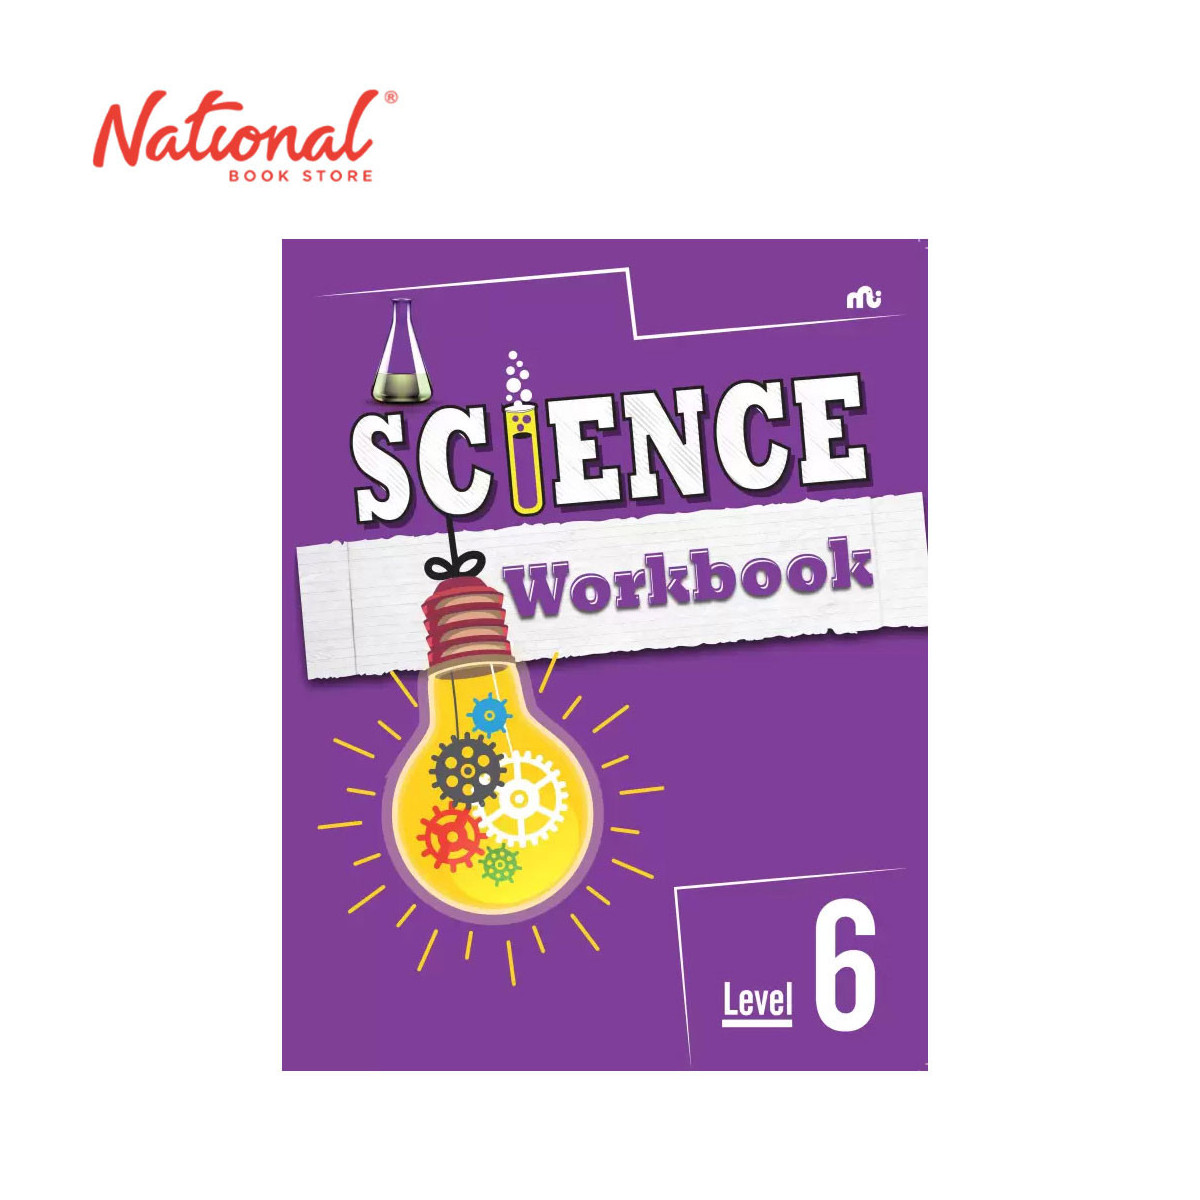 Science Workbook Level 6 - Trade Paperback - Activity Books for Kids